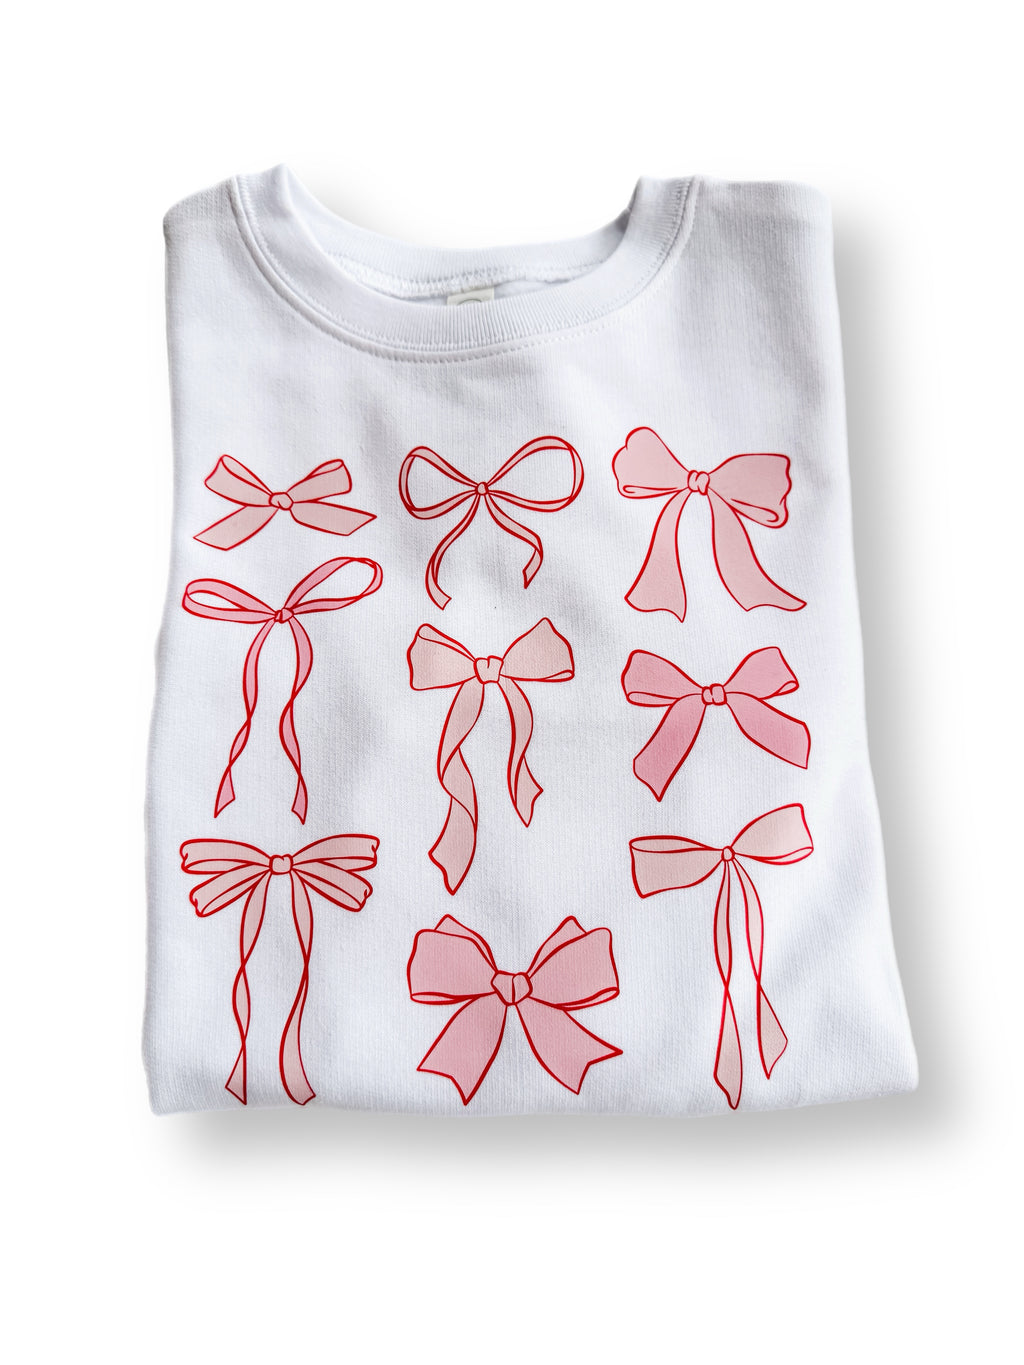 "Bow's Are a Girl's Best Friend" Tee